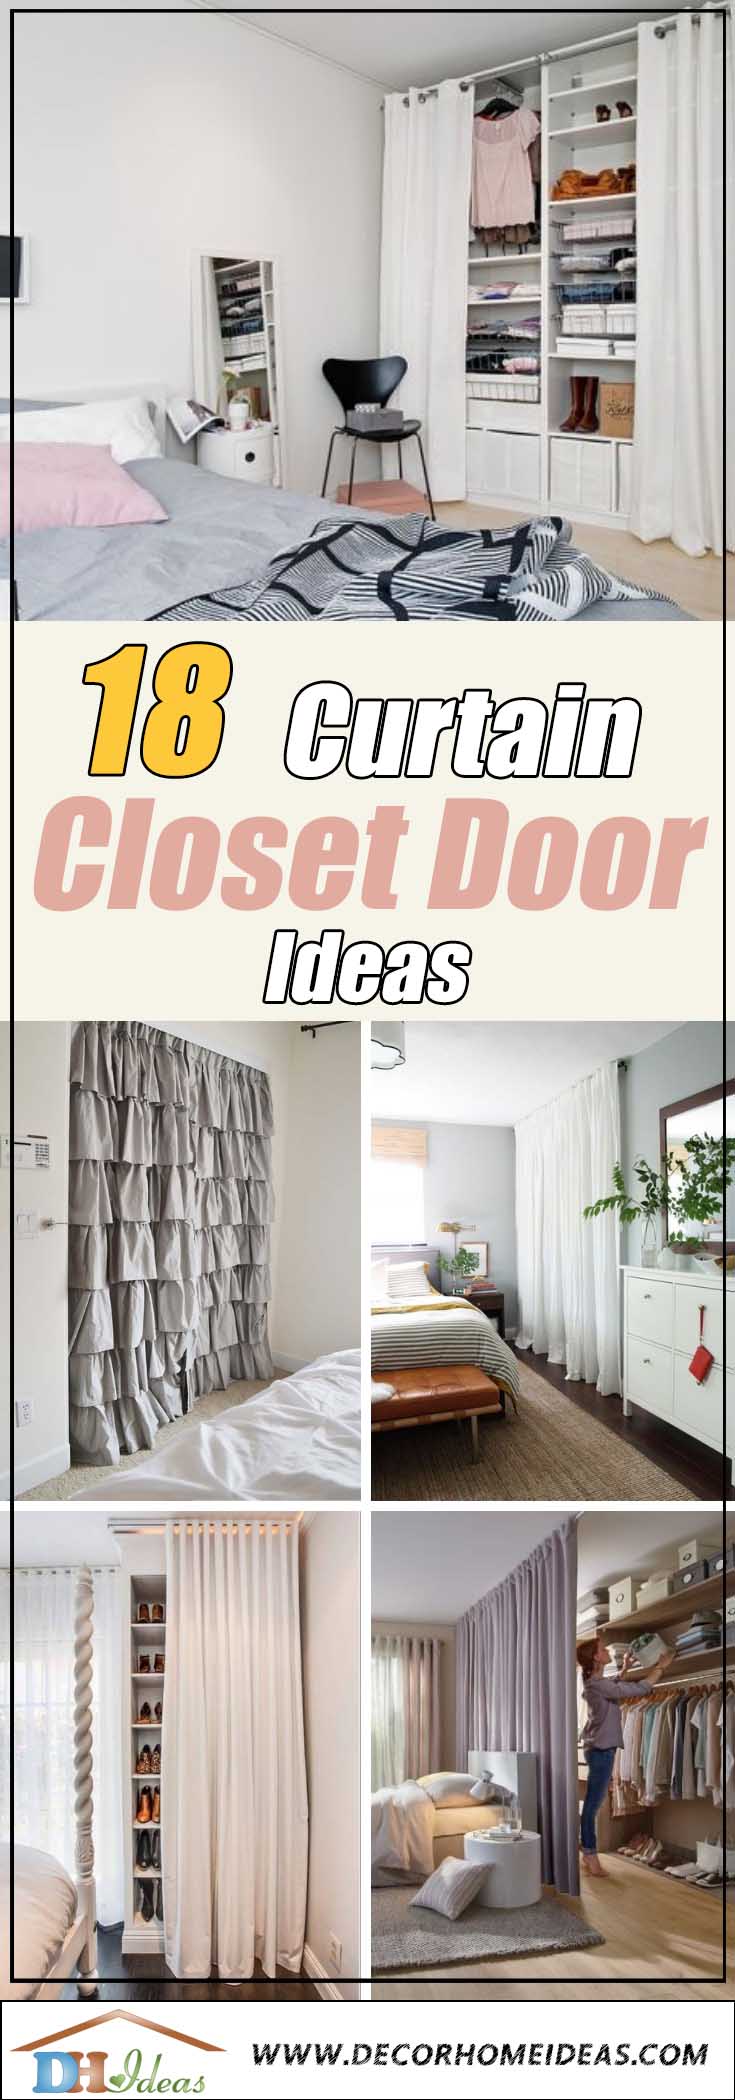 18 Tidy Curtain Closet Doors To Conquer The Mess Decor Home Ideas